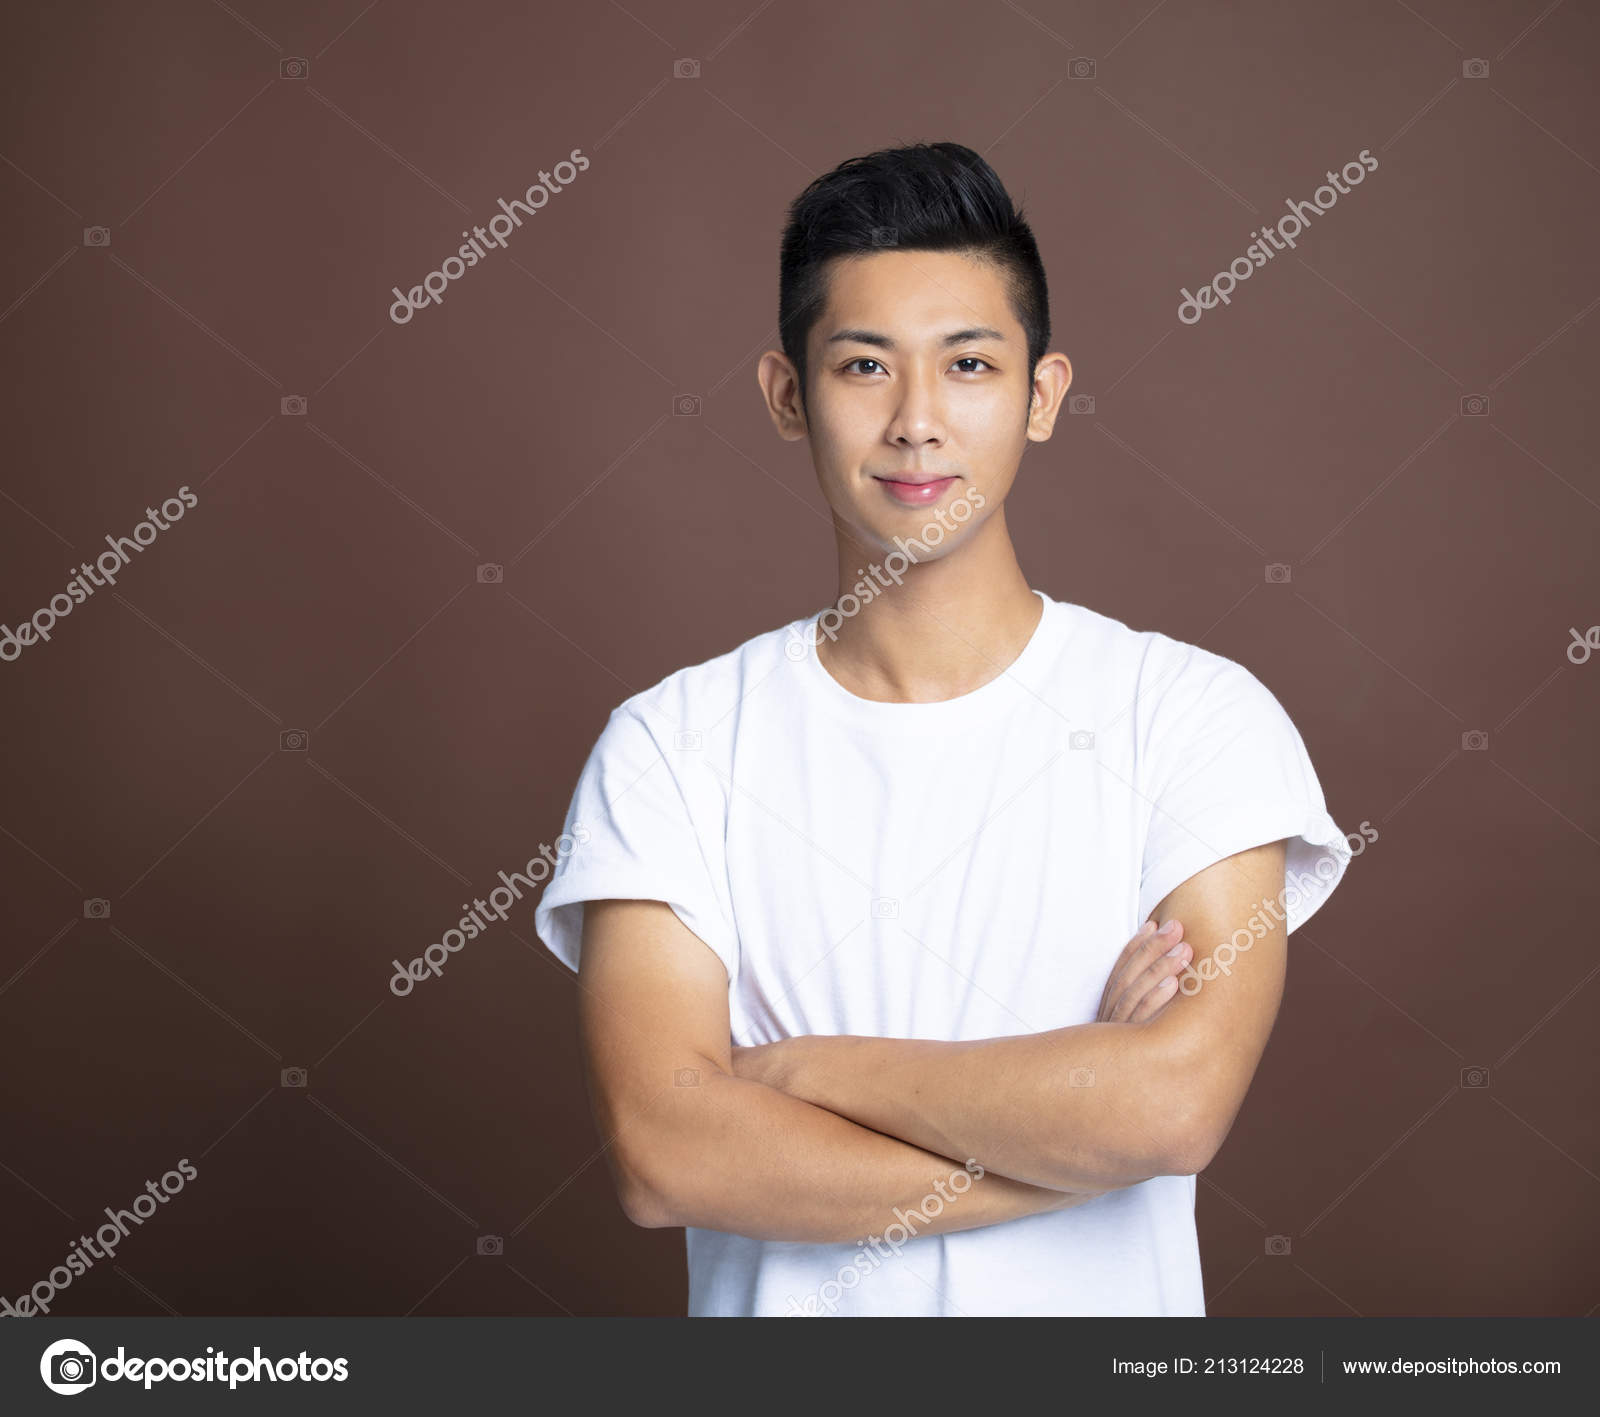 Download A Young Man With A White Shirt And Black Hair